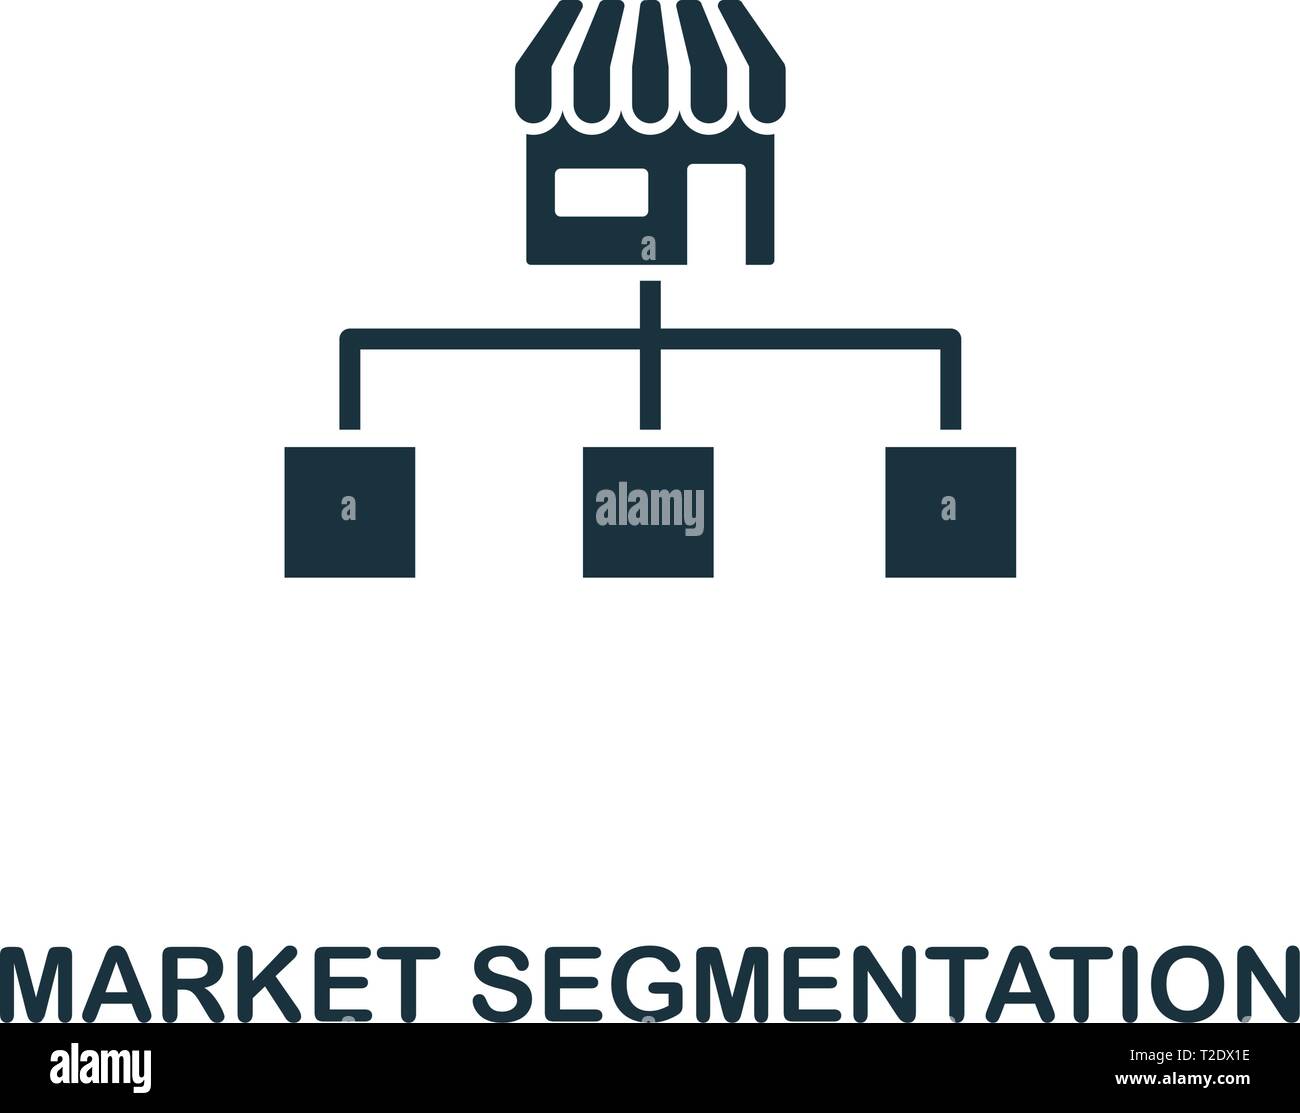 Market Segmentation icon. Creative element design from content icons collection. Pixel perfect Market Segmentation icon for web design, apps, software Stock Vector